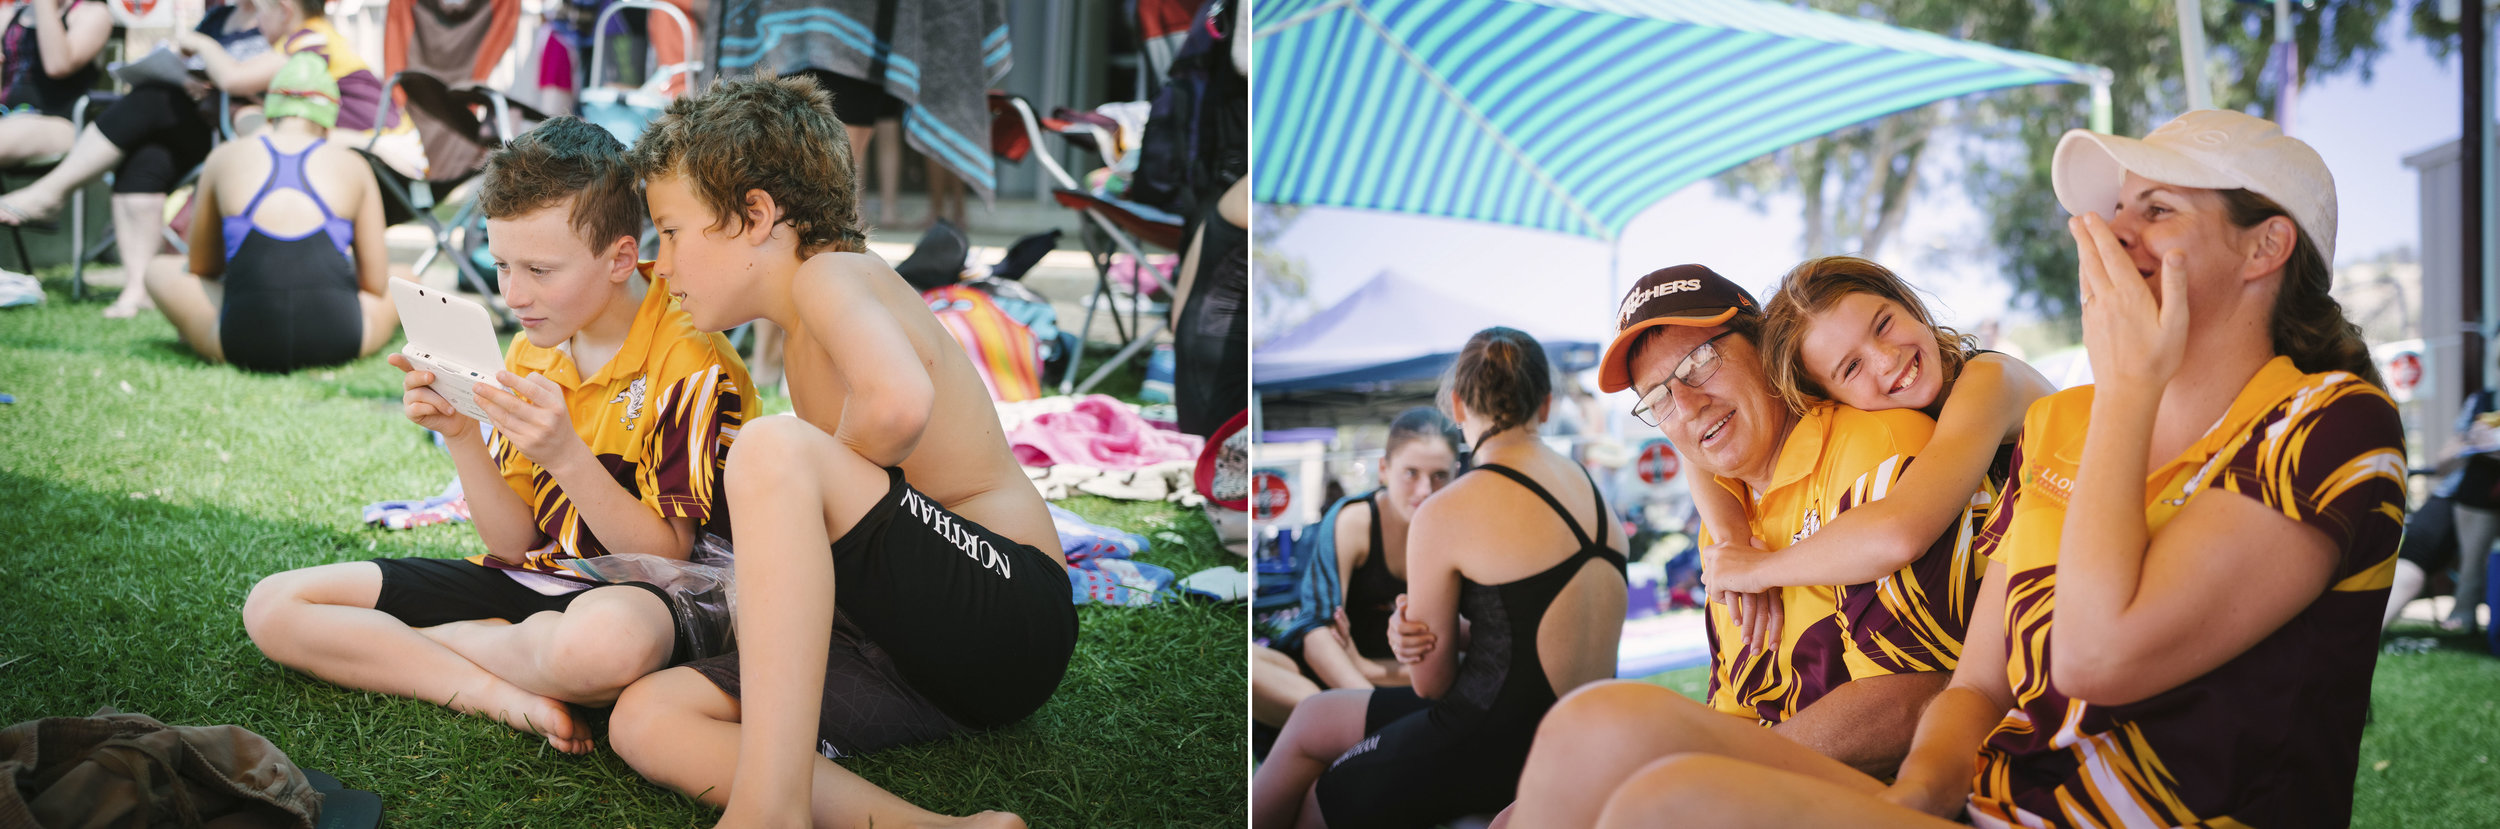 Angie Roe Photography Northam Swimming Event (9and10).jpg